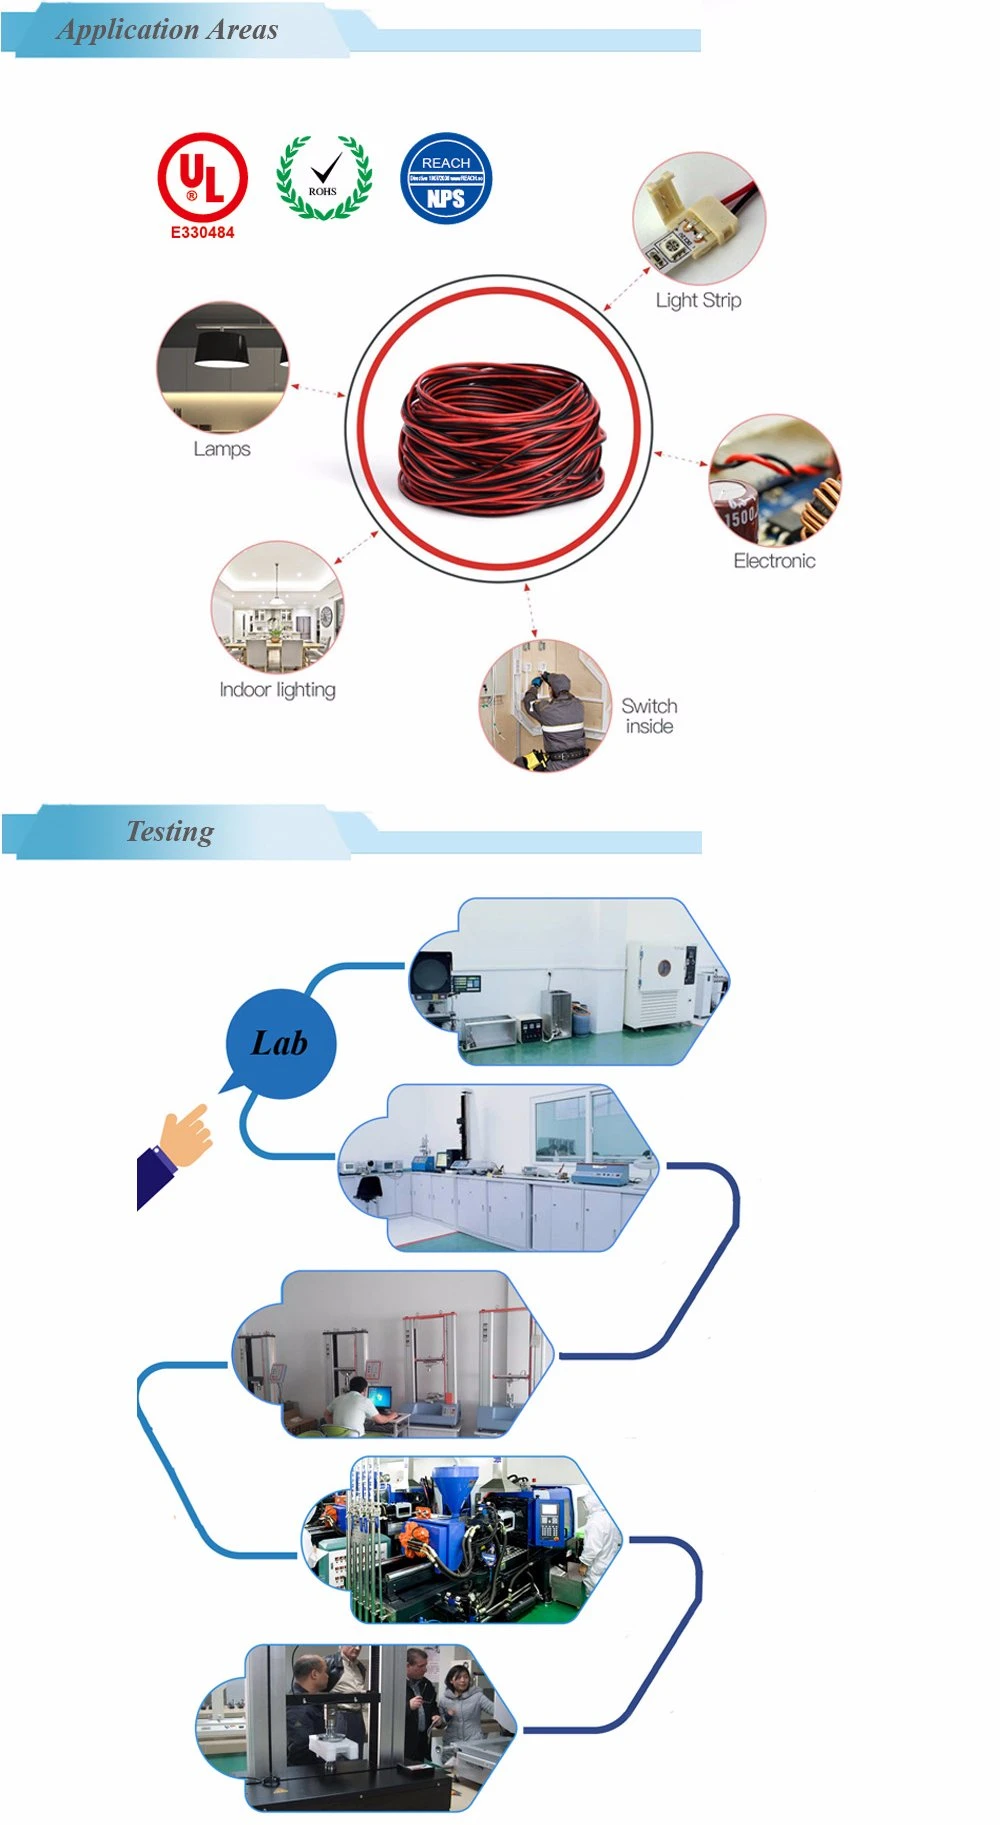 UL-1185 Single Conductor Insulation Wire, Cable, Automotive Wire, UL Standard, LED Light